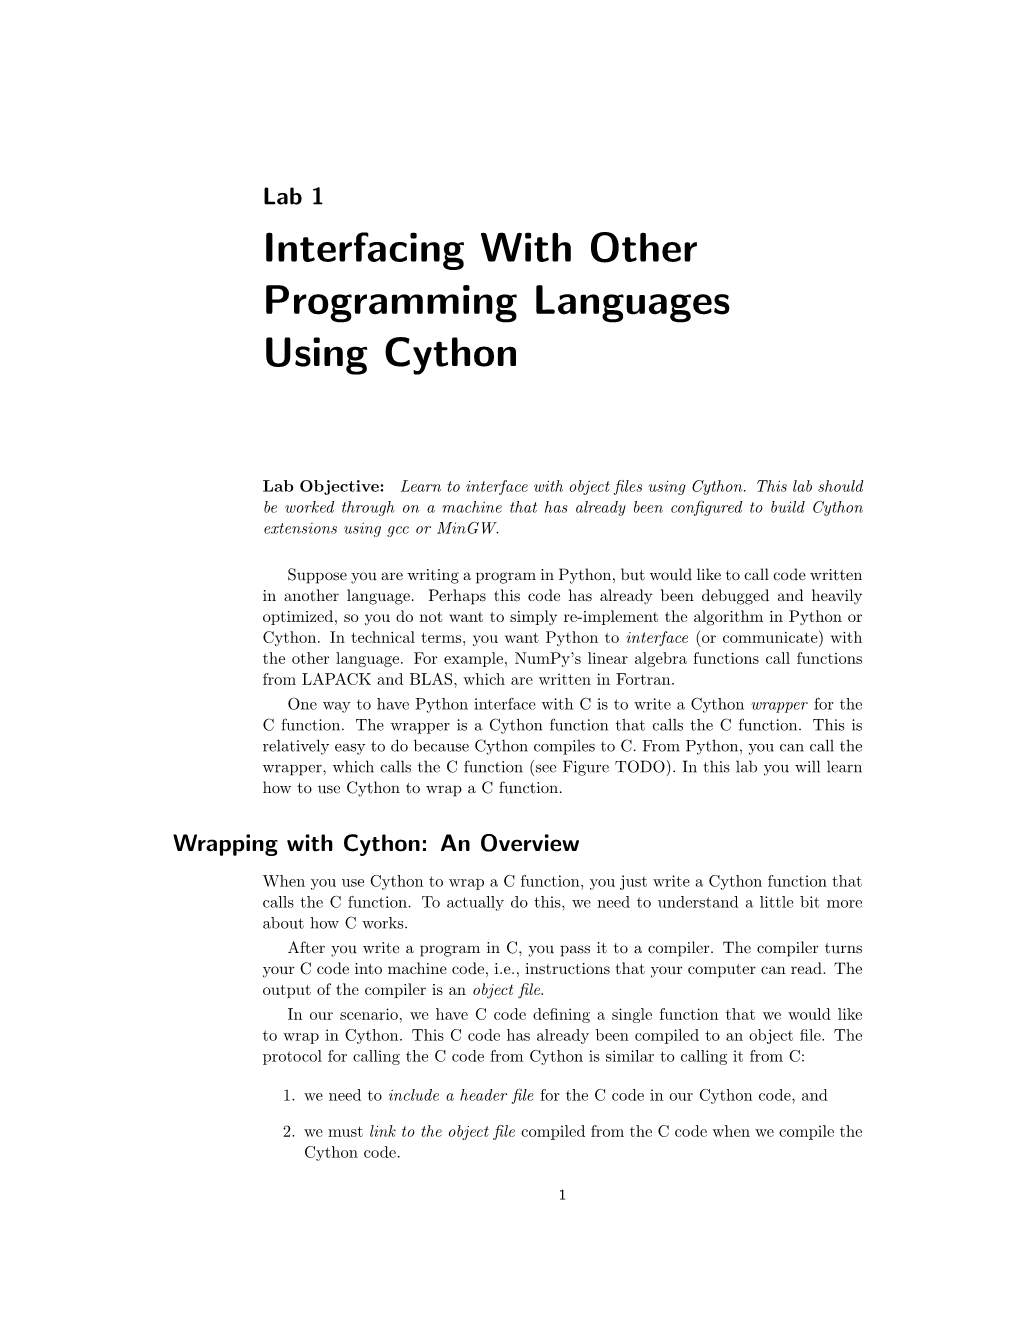 Interfacing with Other Programming Languages Using Cython